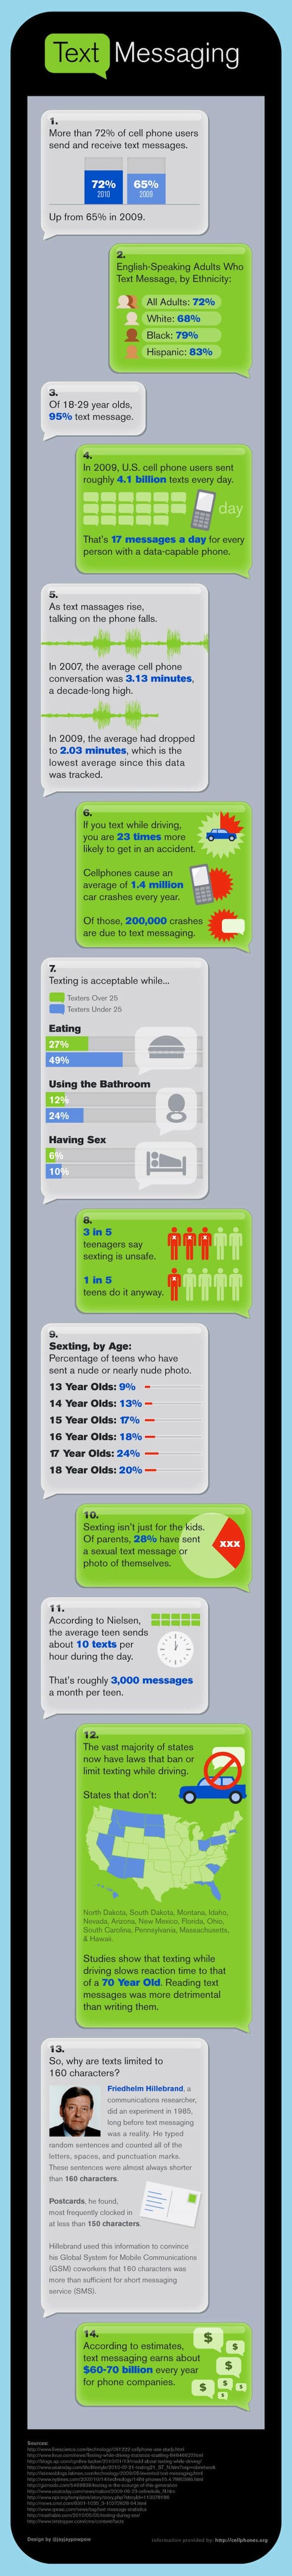 Text Messaging Infographic